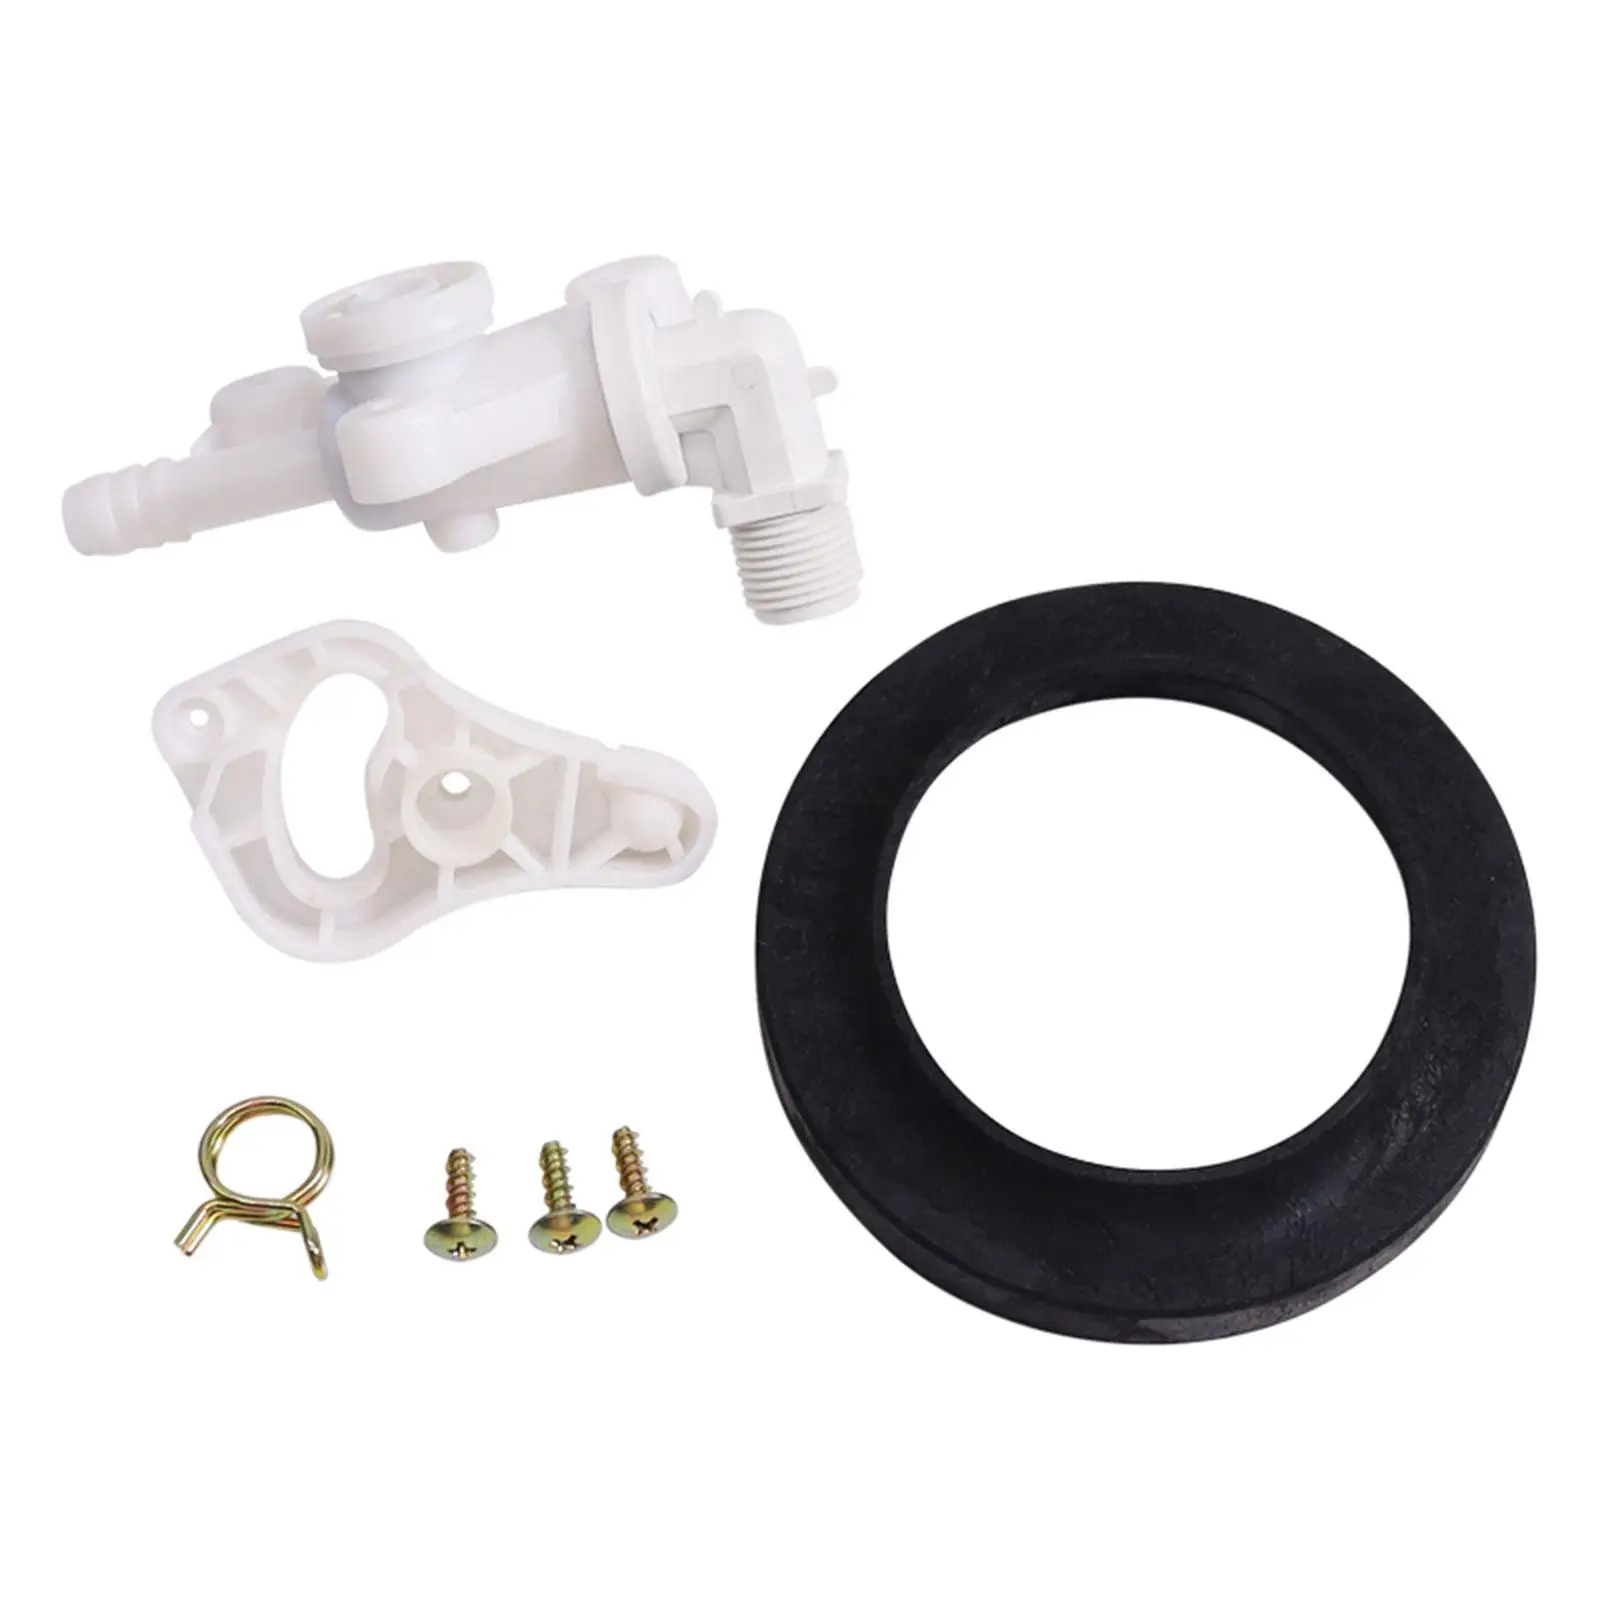 34100 Water Valve for Style Plus Toilets Replacements Accessories for Practical Easy to Install Durable Convenient